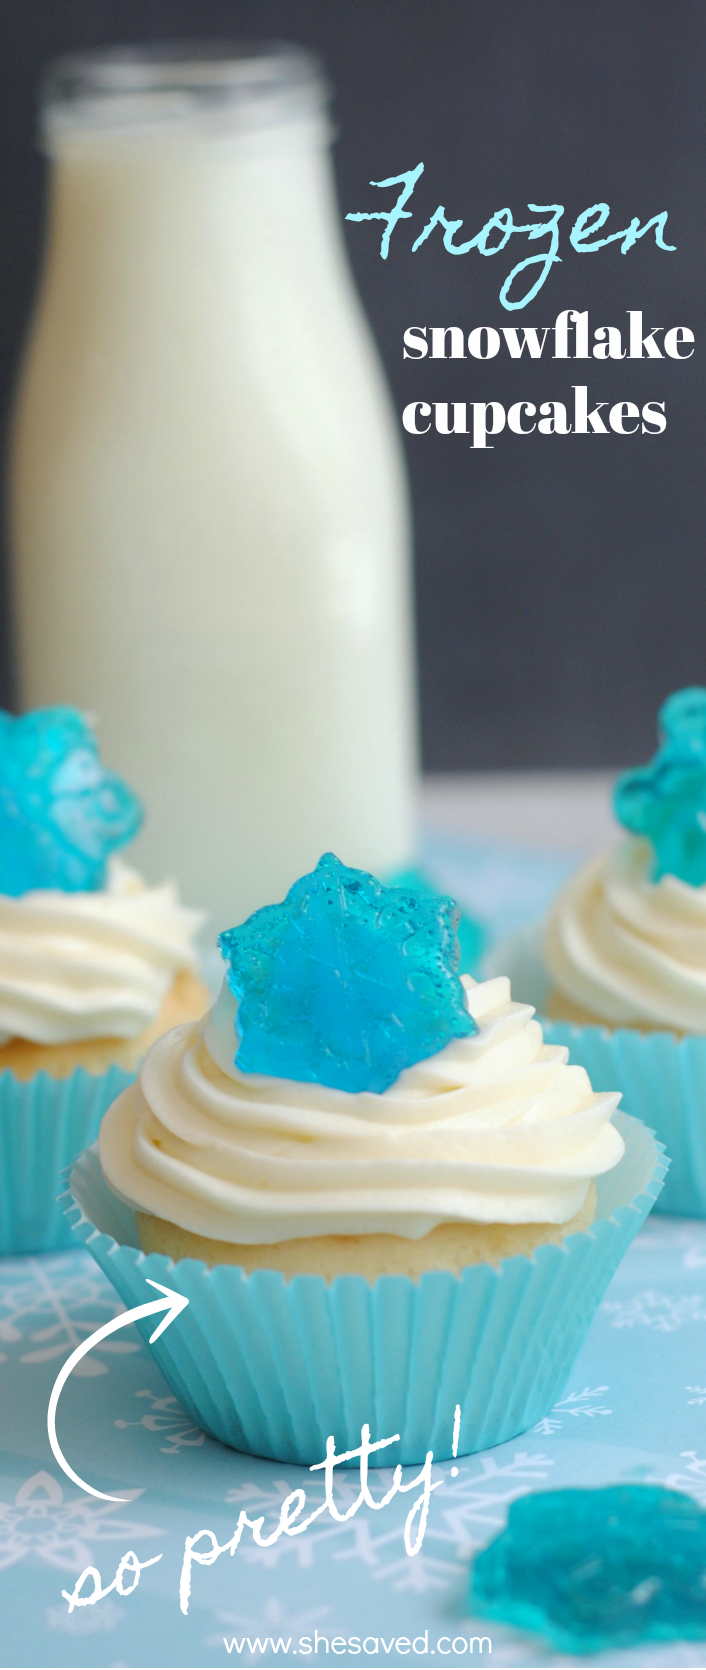 Easy frozen movie cupcakes with blue candy snowflakes recipe